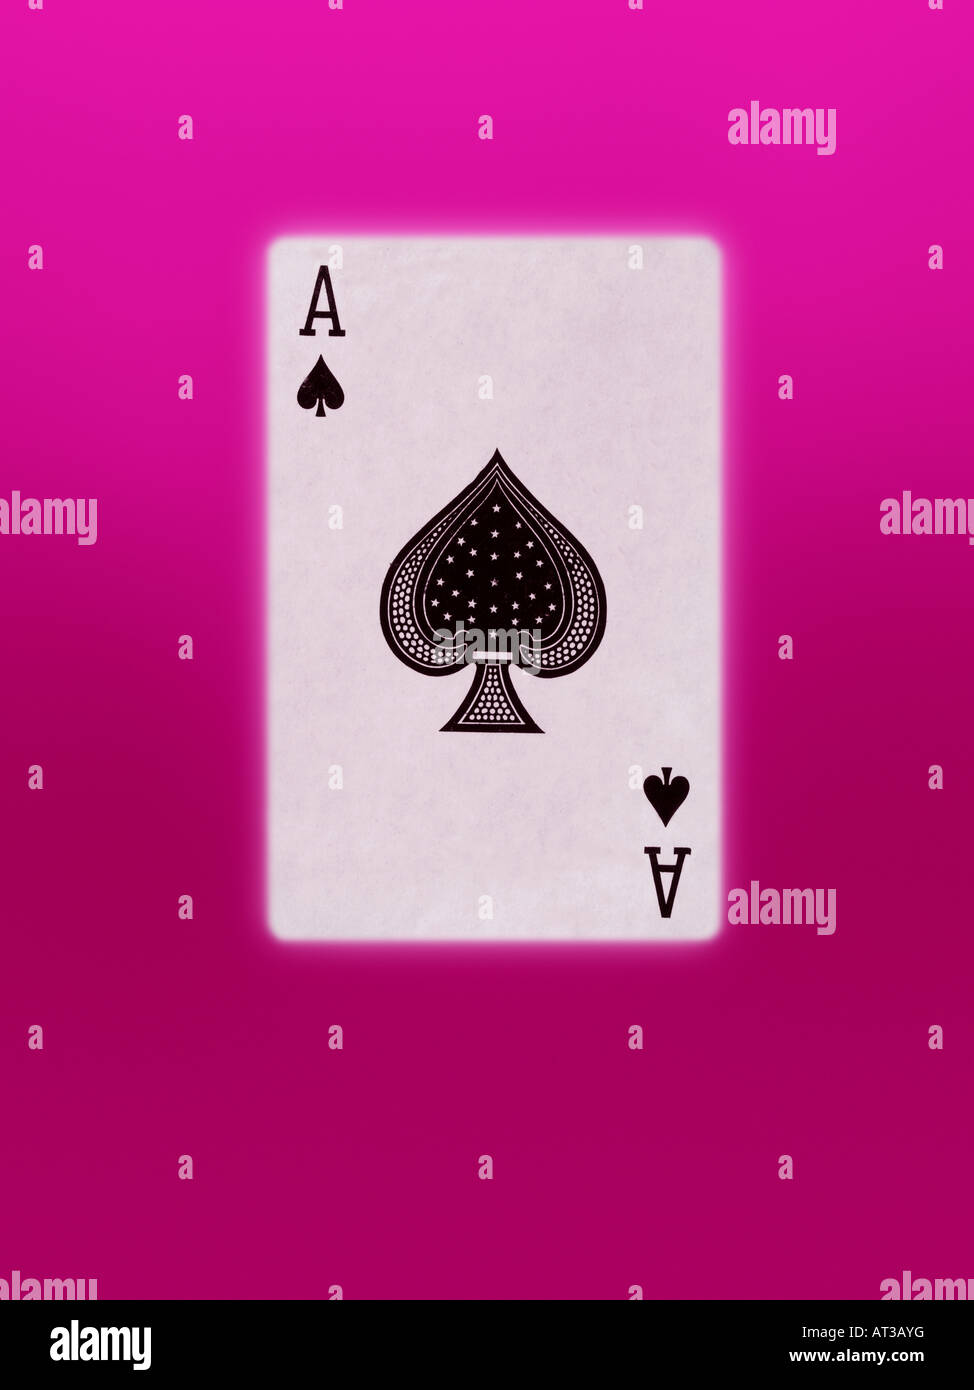 A playing card, the ace of spades, pink background Stock Photo